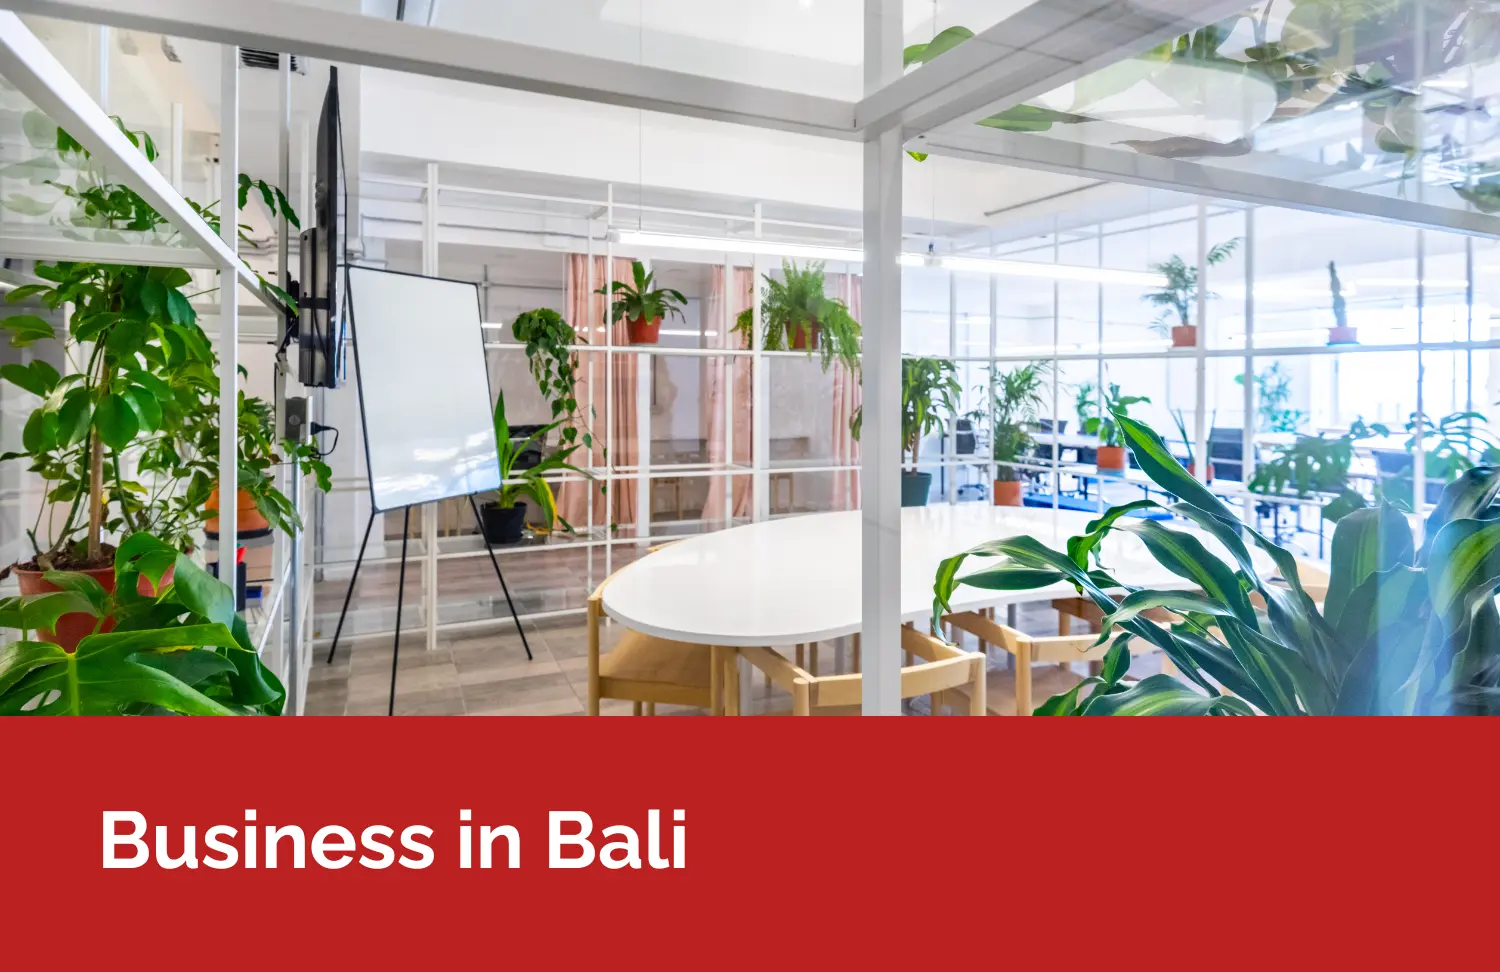 Business in Bali